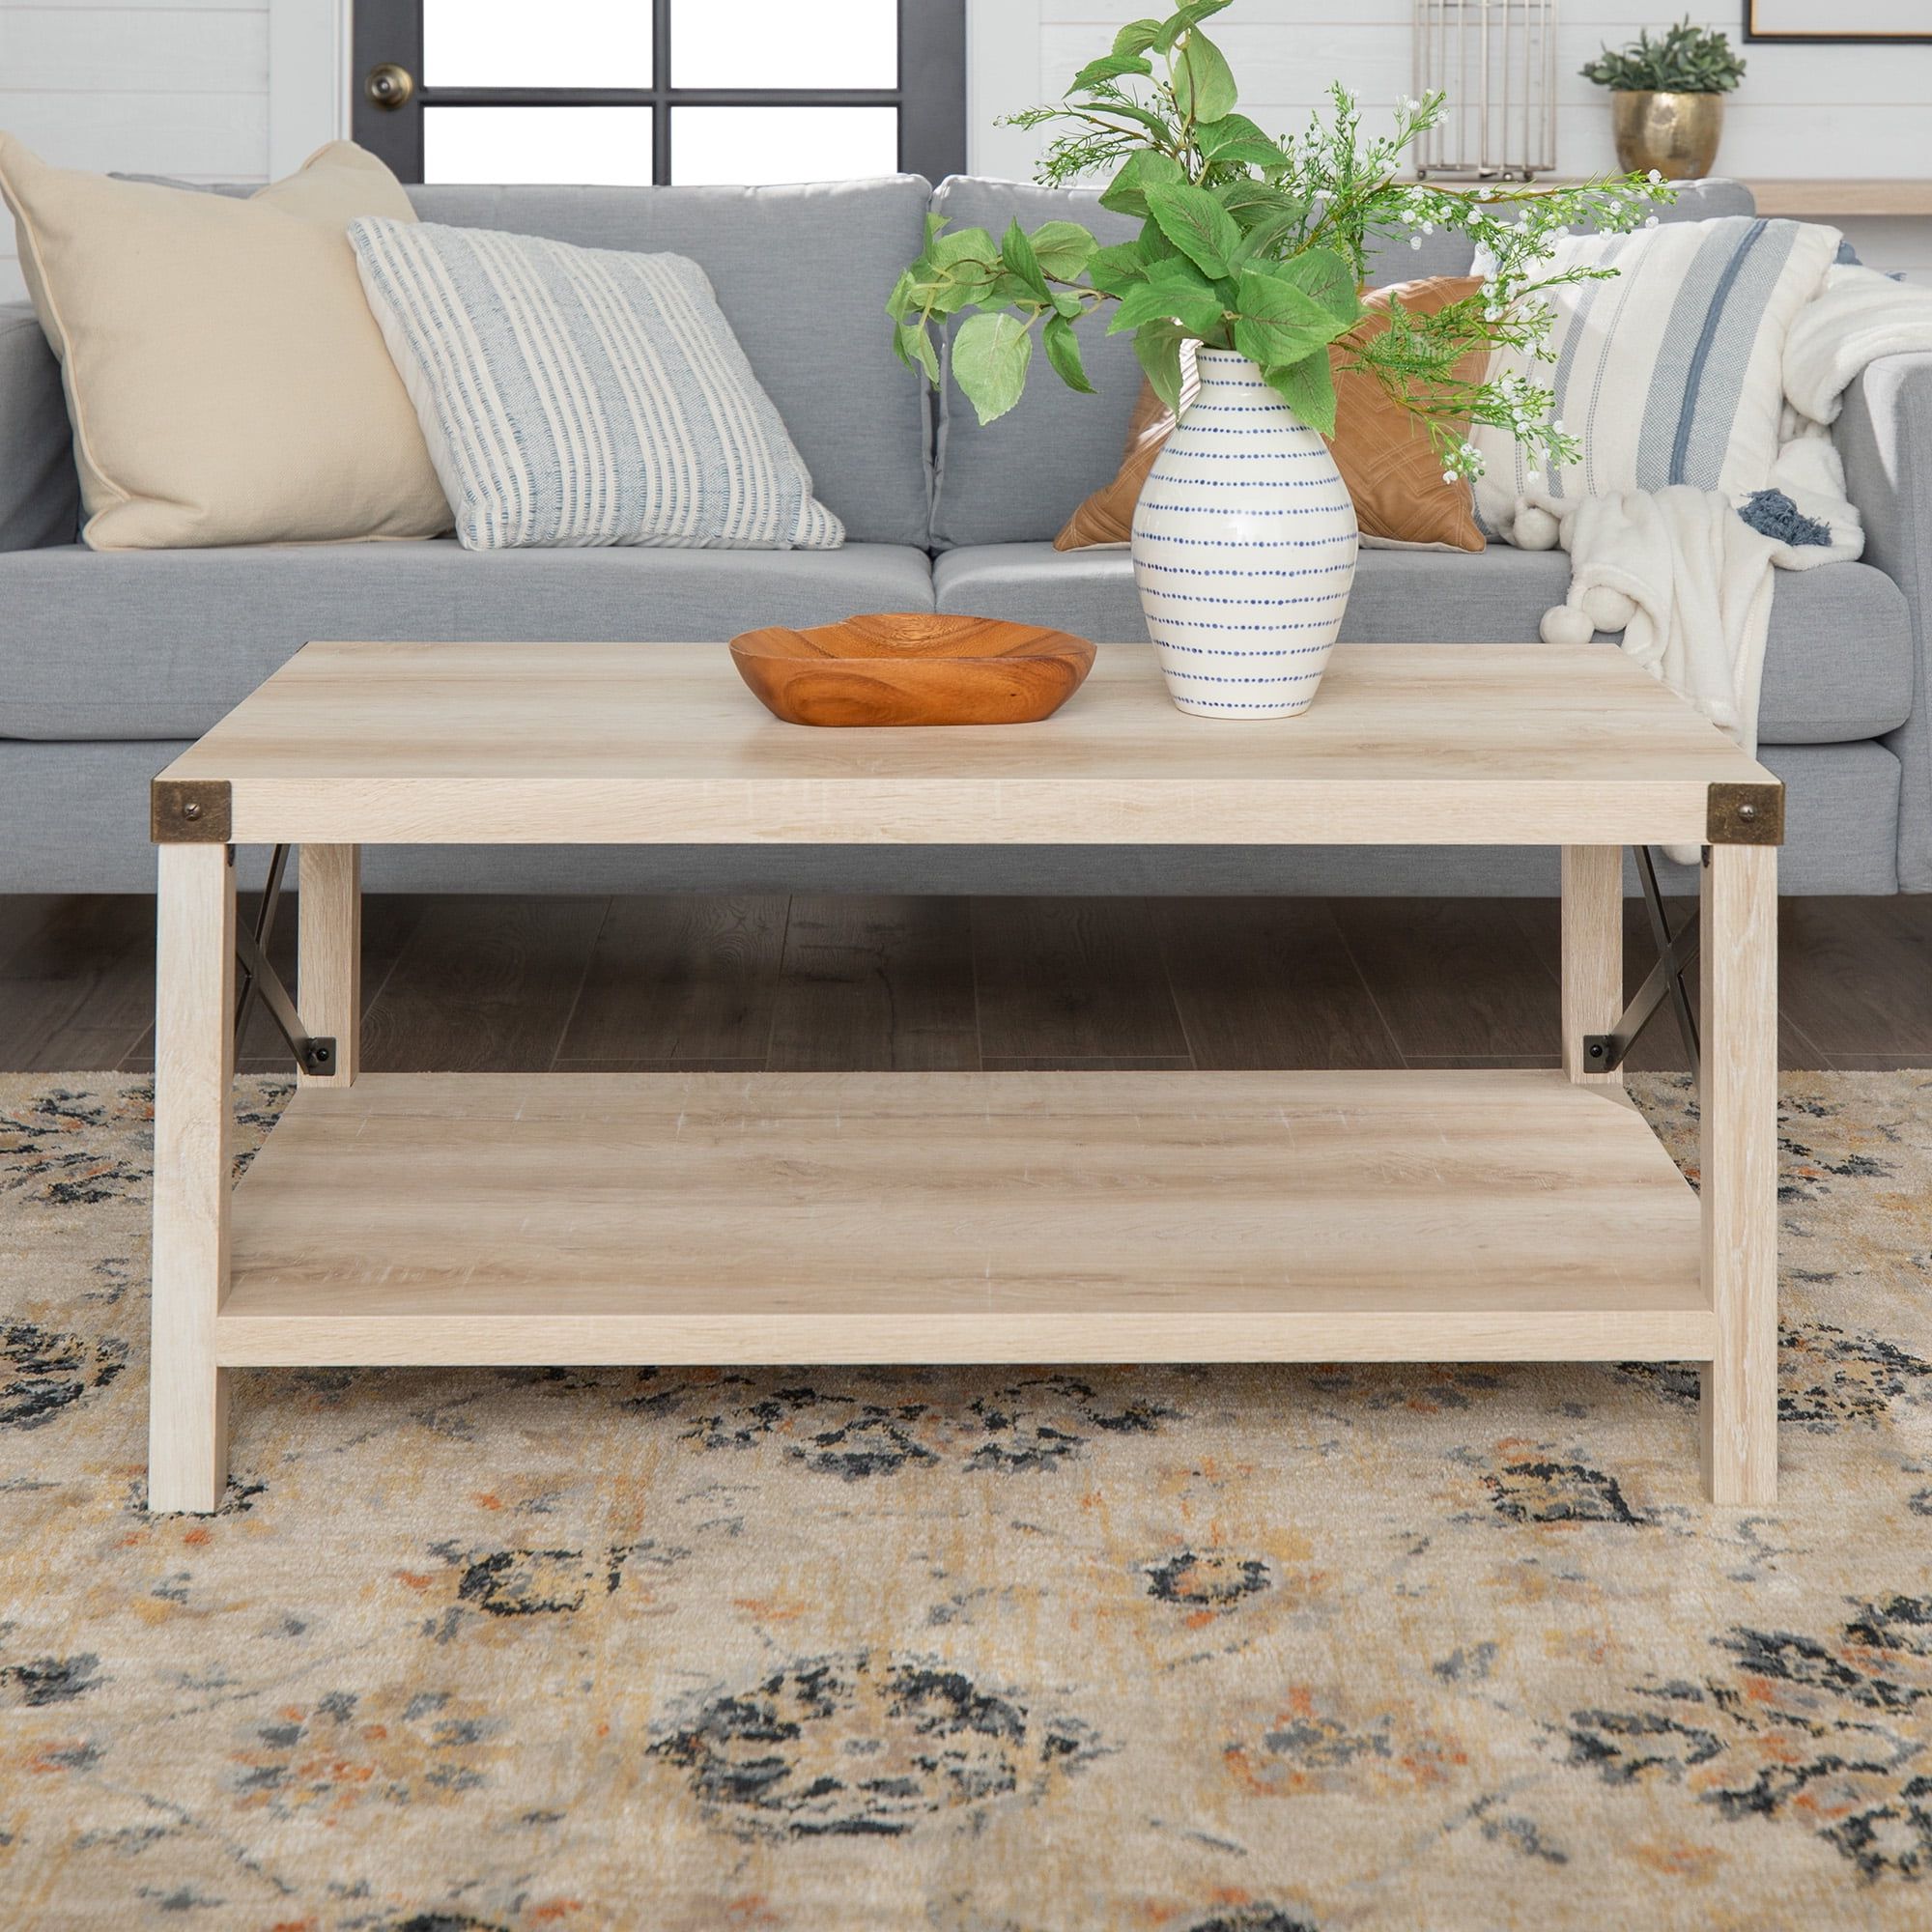 Woven Paths Magnolia Metal X Coffee Table, White Oak – Walmart Inside Woven Paths Coffee Tables (Gallery 20 of 20)